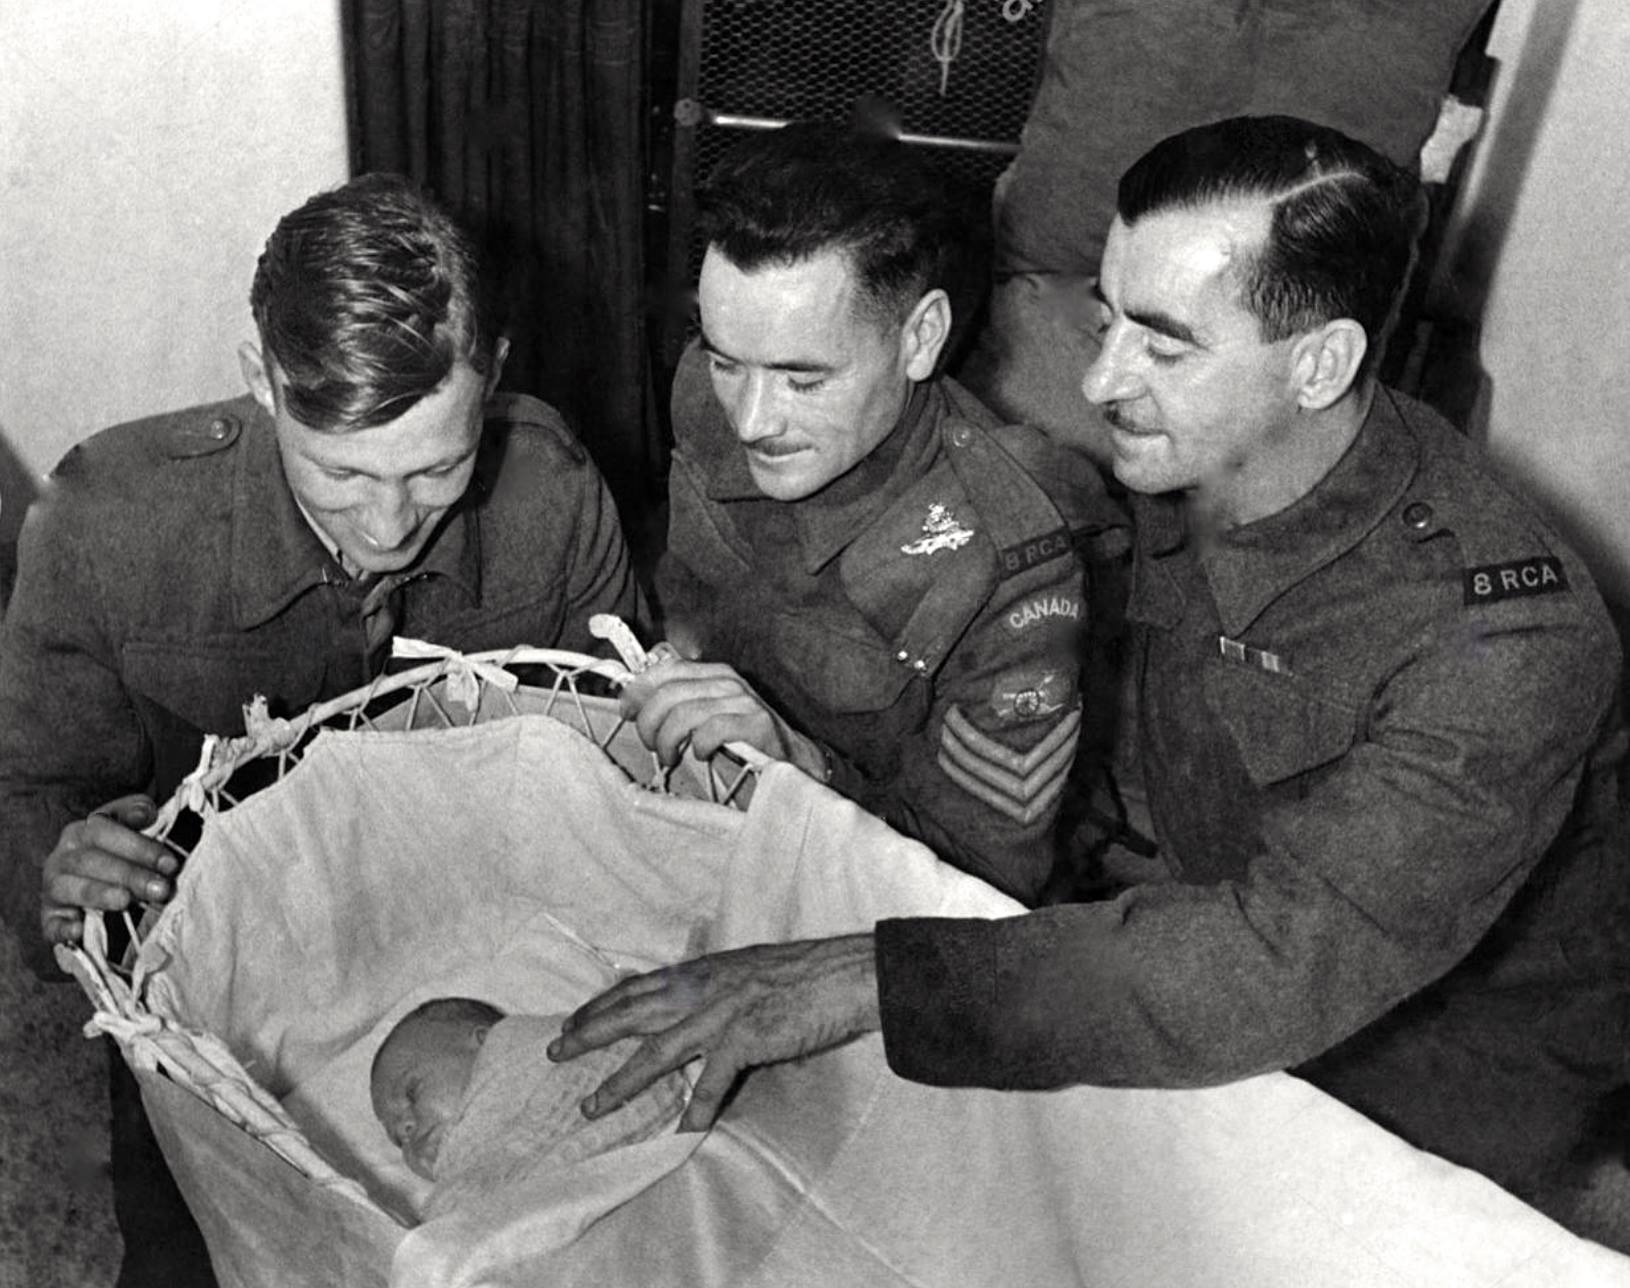 Abandoned Baby Found by Canadian RCA Soldiers in Woking September 23 1941 - Black and White Original.jpg